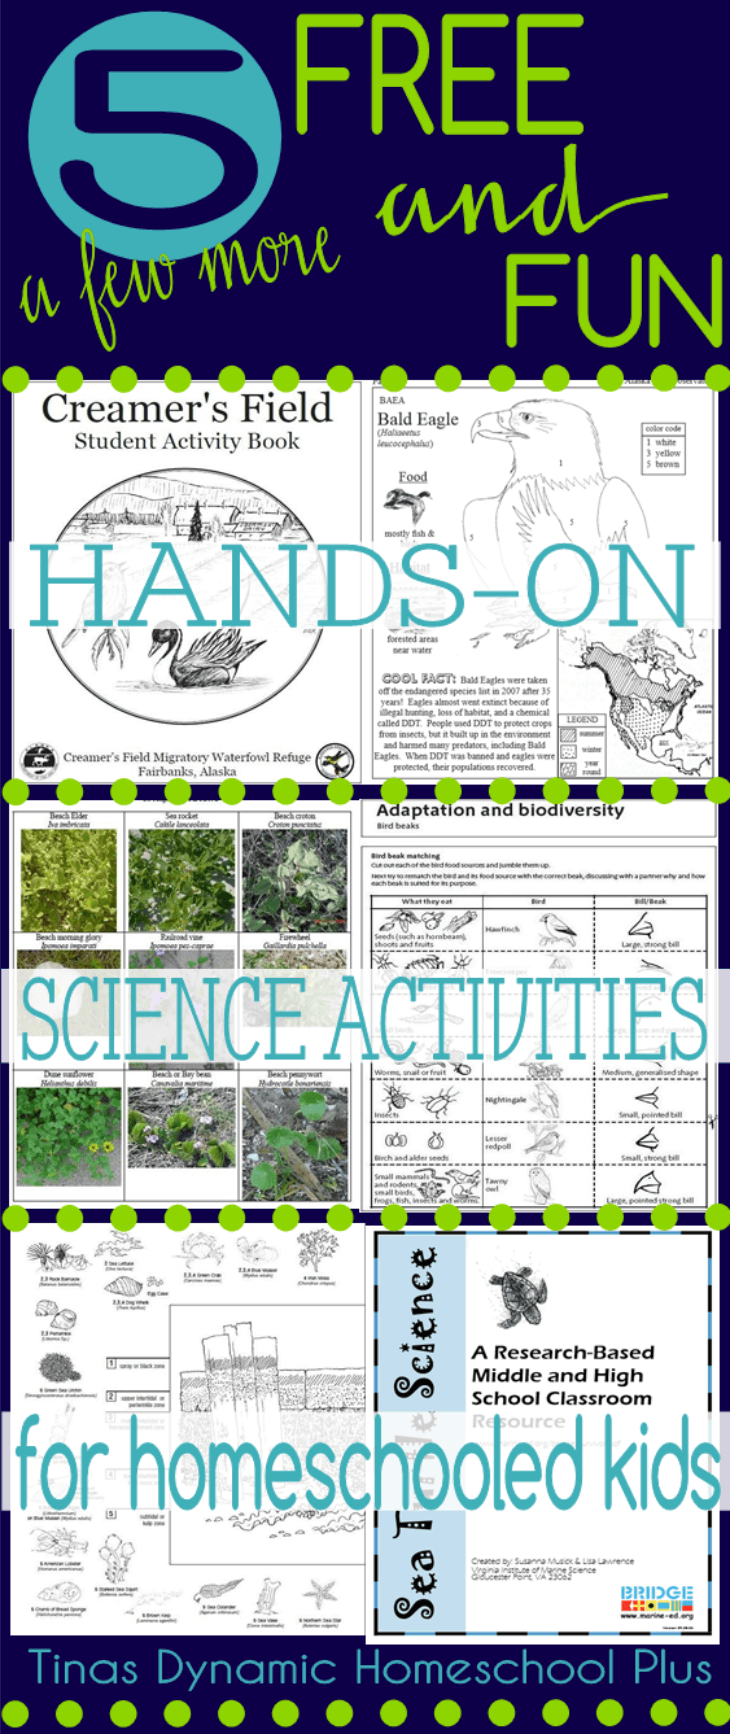 5 FUN and FREE Hands-on Science Activities for Homeschooled Kids @ Tina's Dynamic Homeschool Plus